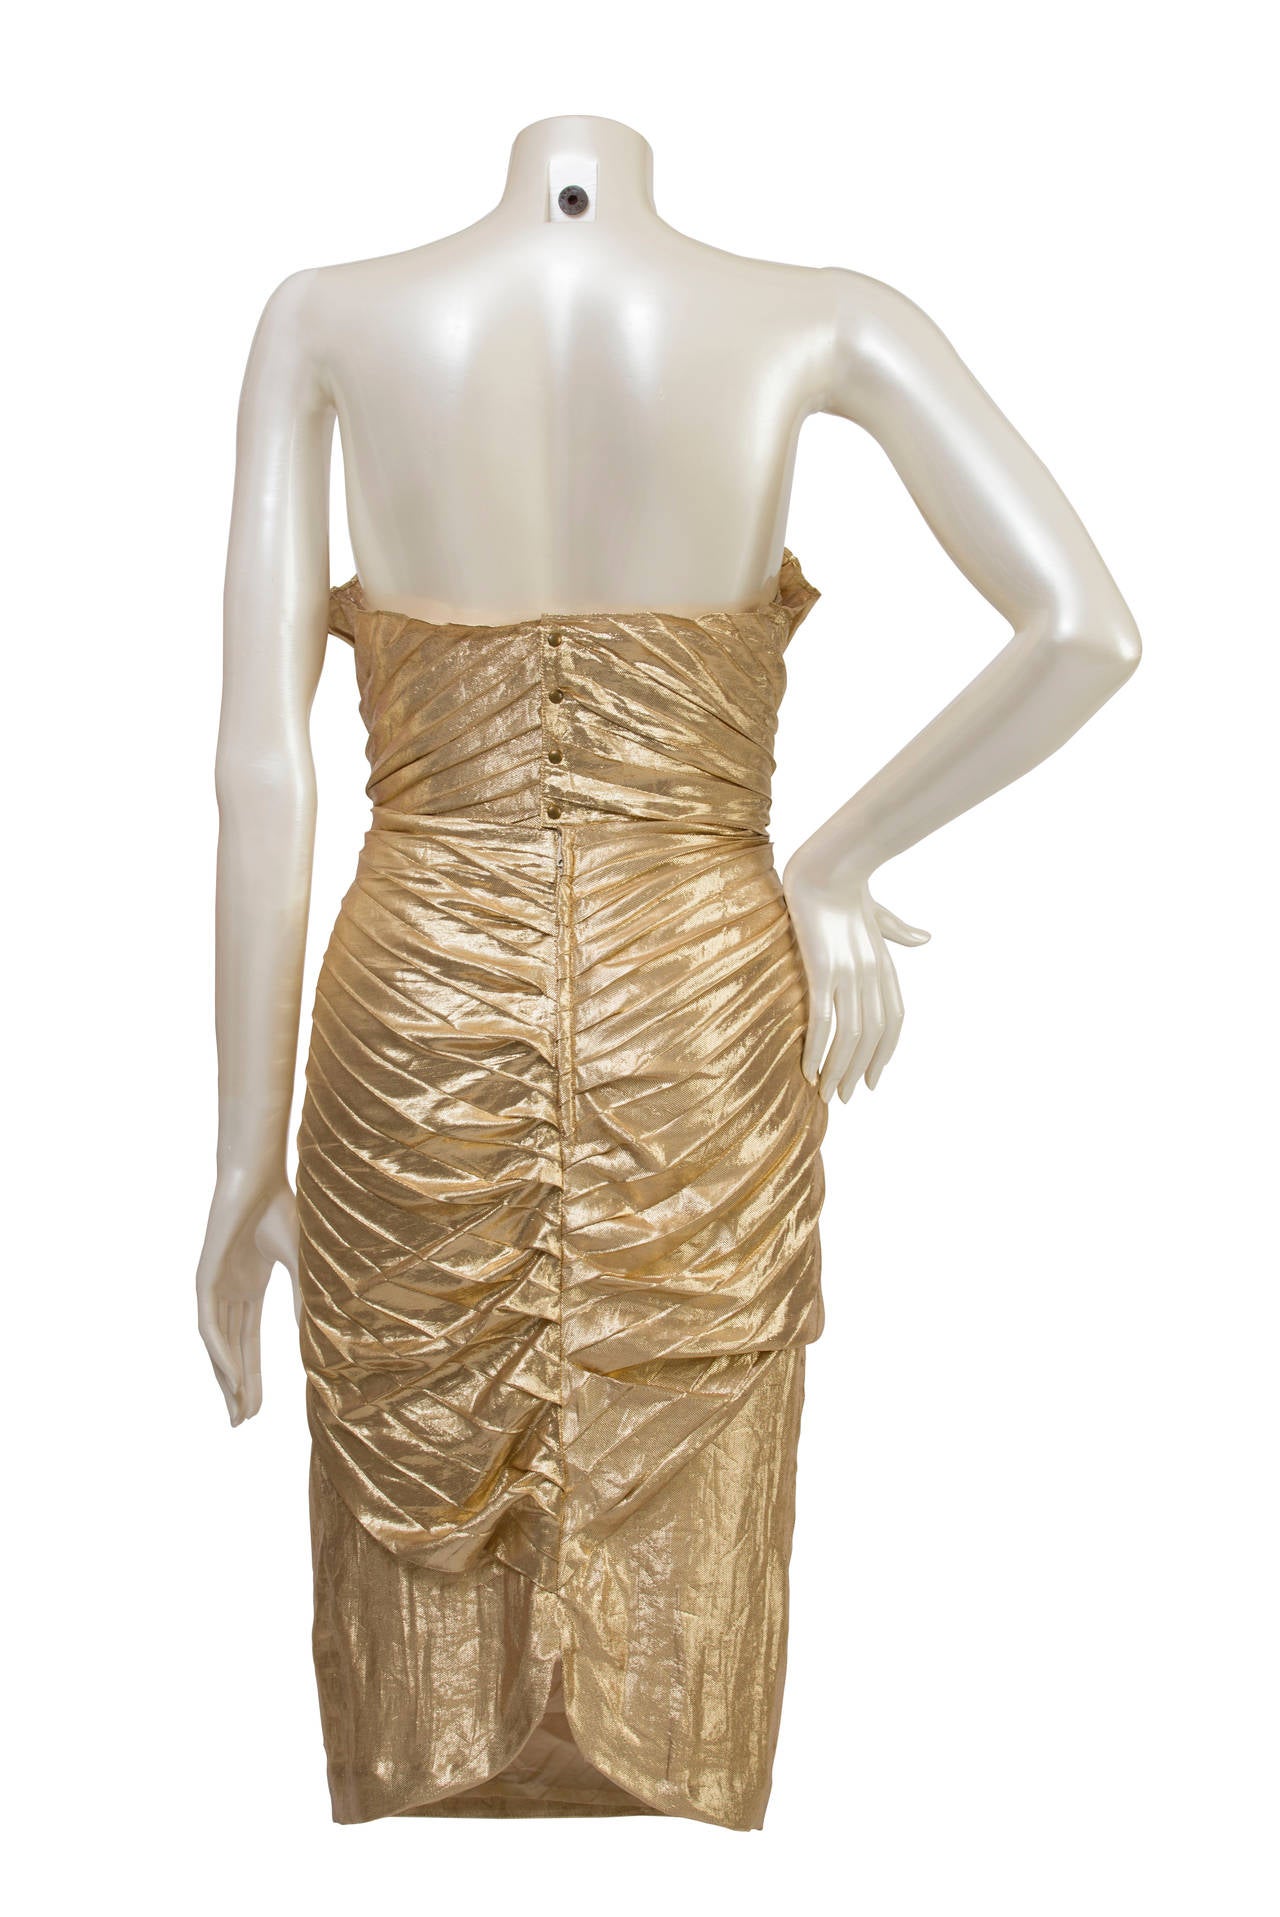 Thierry Mugler Vintage Haute Couture Gold dress. Seashells designed on the front.